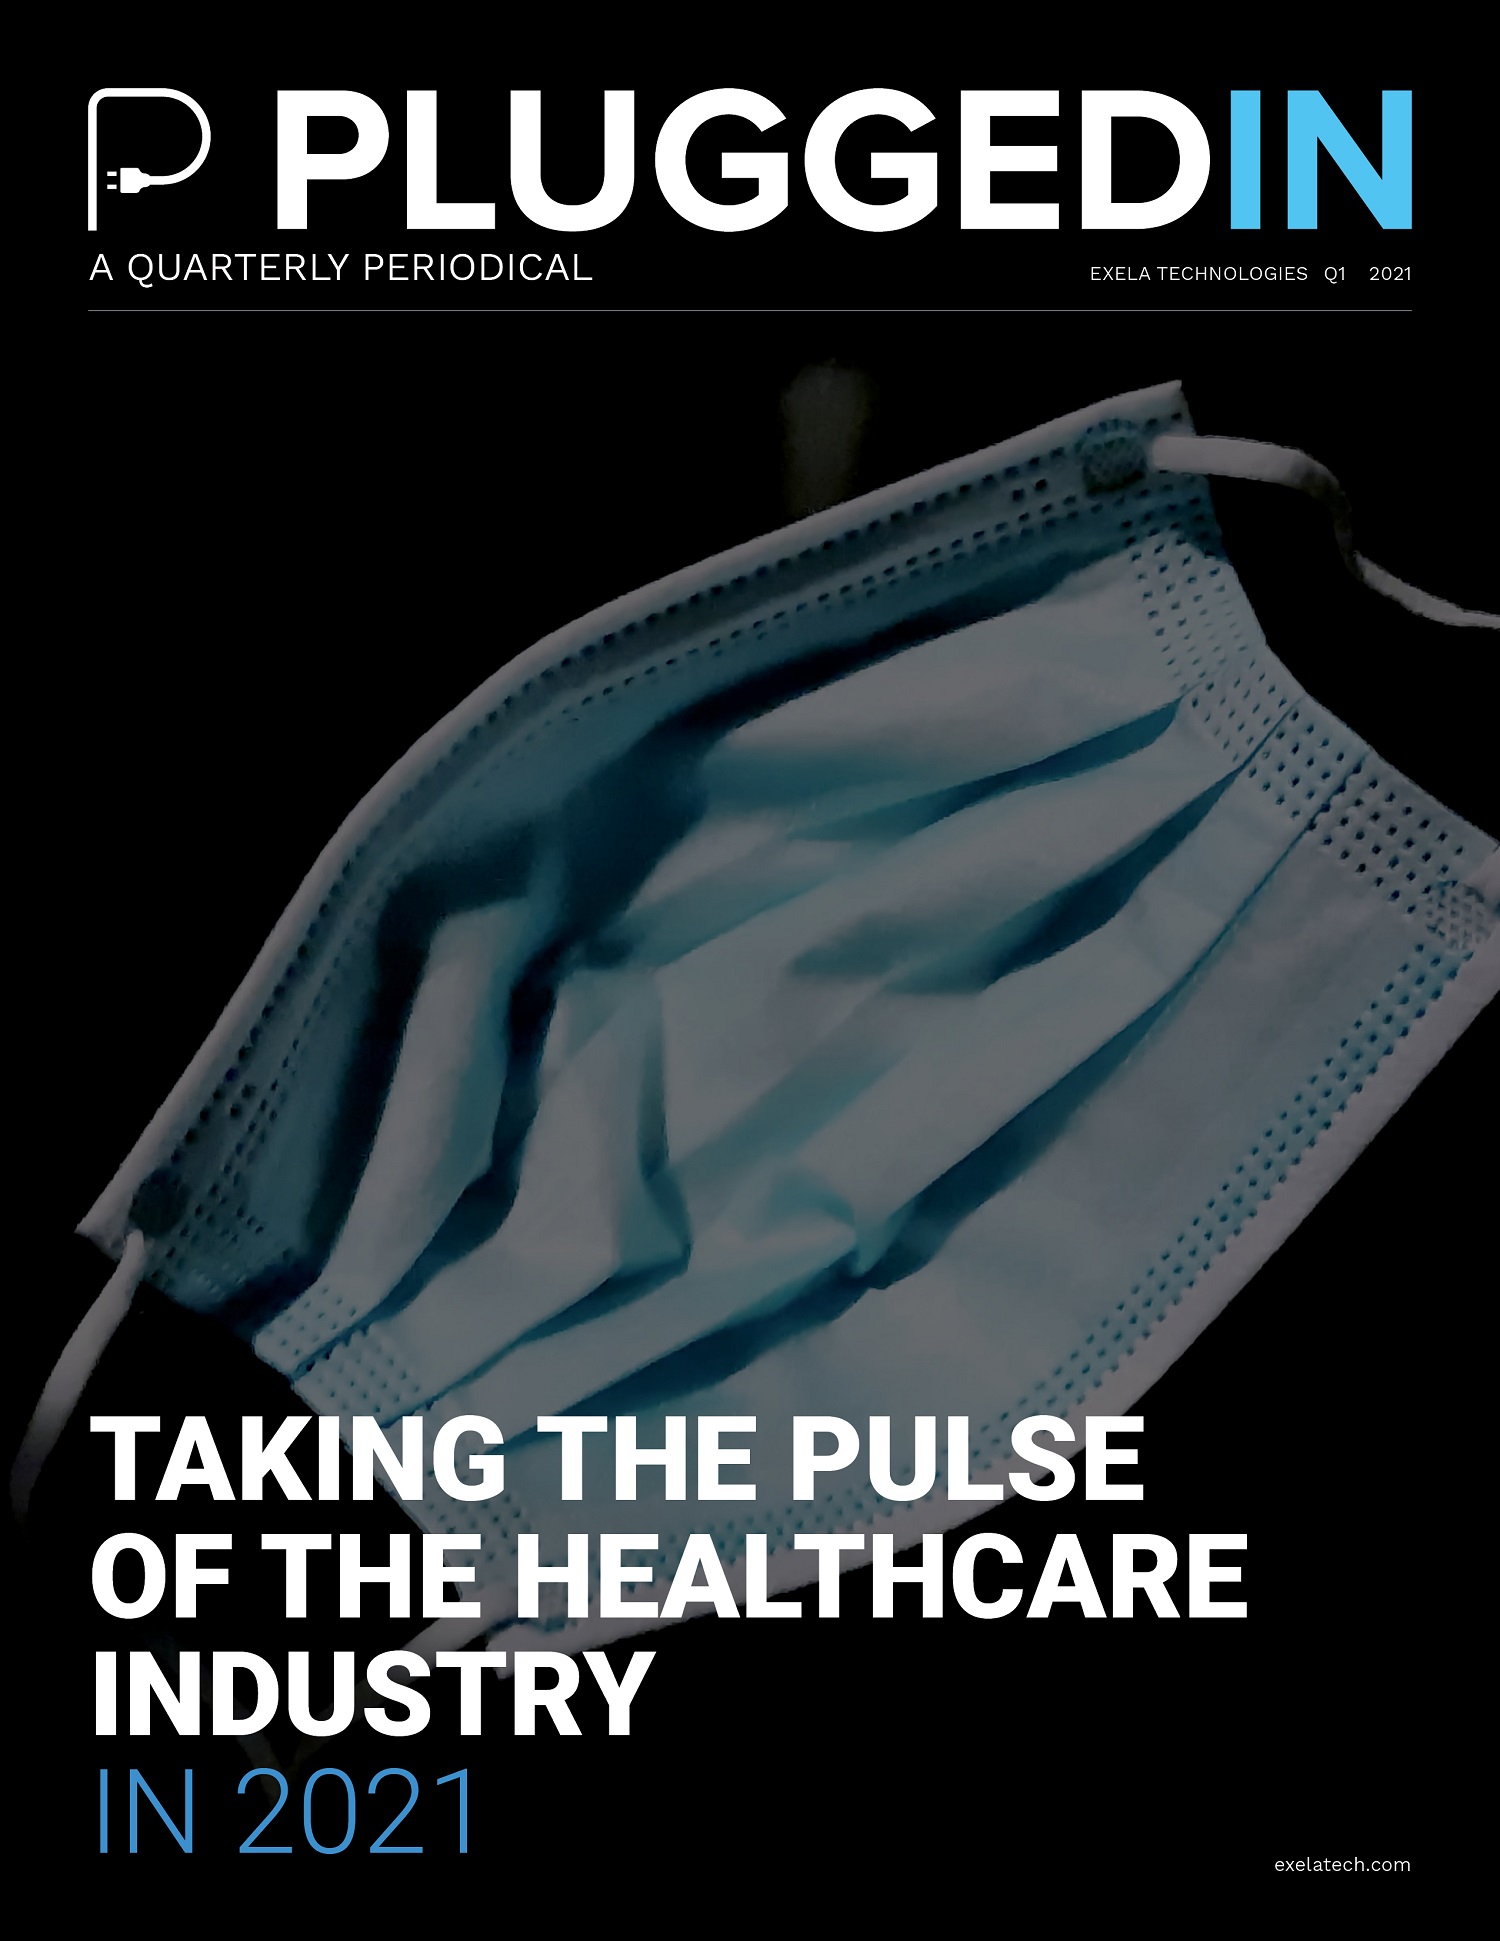 PluggedIN: Taking the Pulse of the Healthcare Industry in 2021